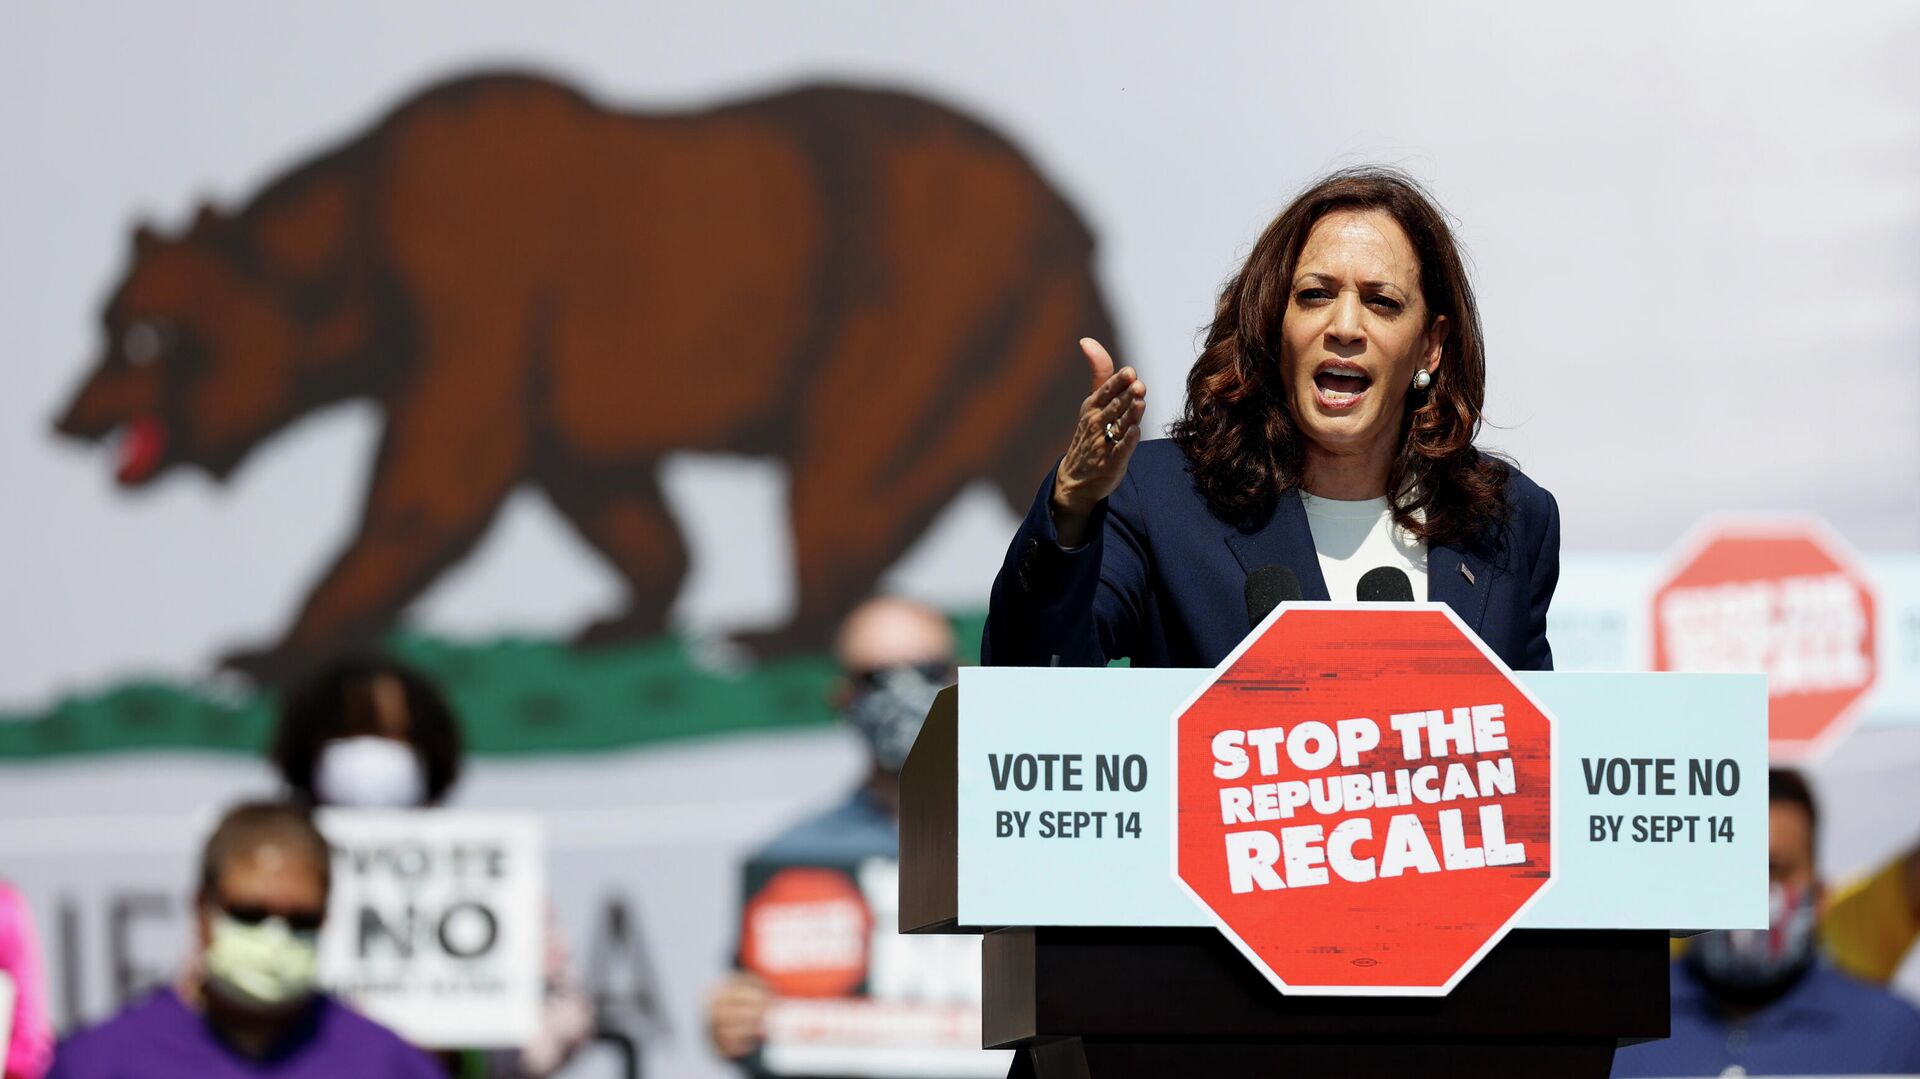 U.S. Vice President Kamala Harris speaks during an appearance with California Governor Gavin Newsom, who is facing a Republican-led recall election in September, in San Leandro, California, U.S., September 8, 2021 - Sputnik International, 1920, 09.09.2021